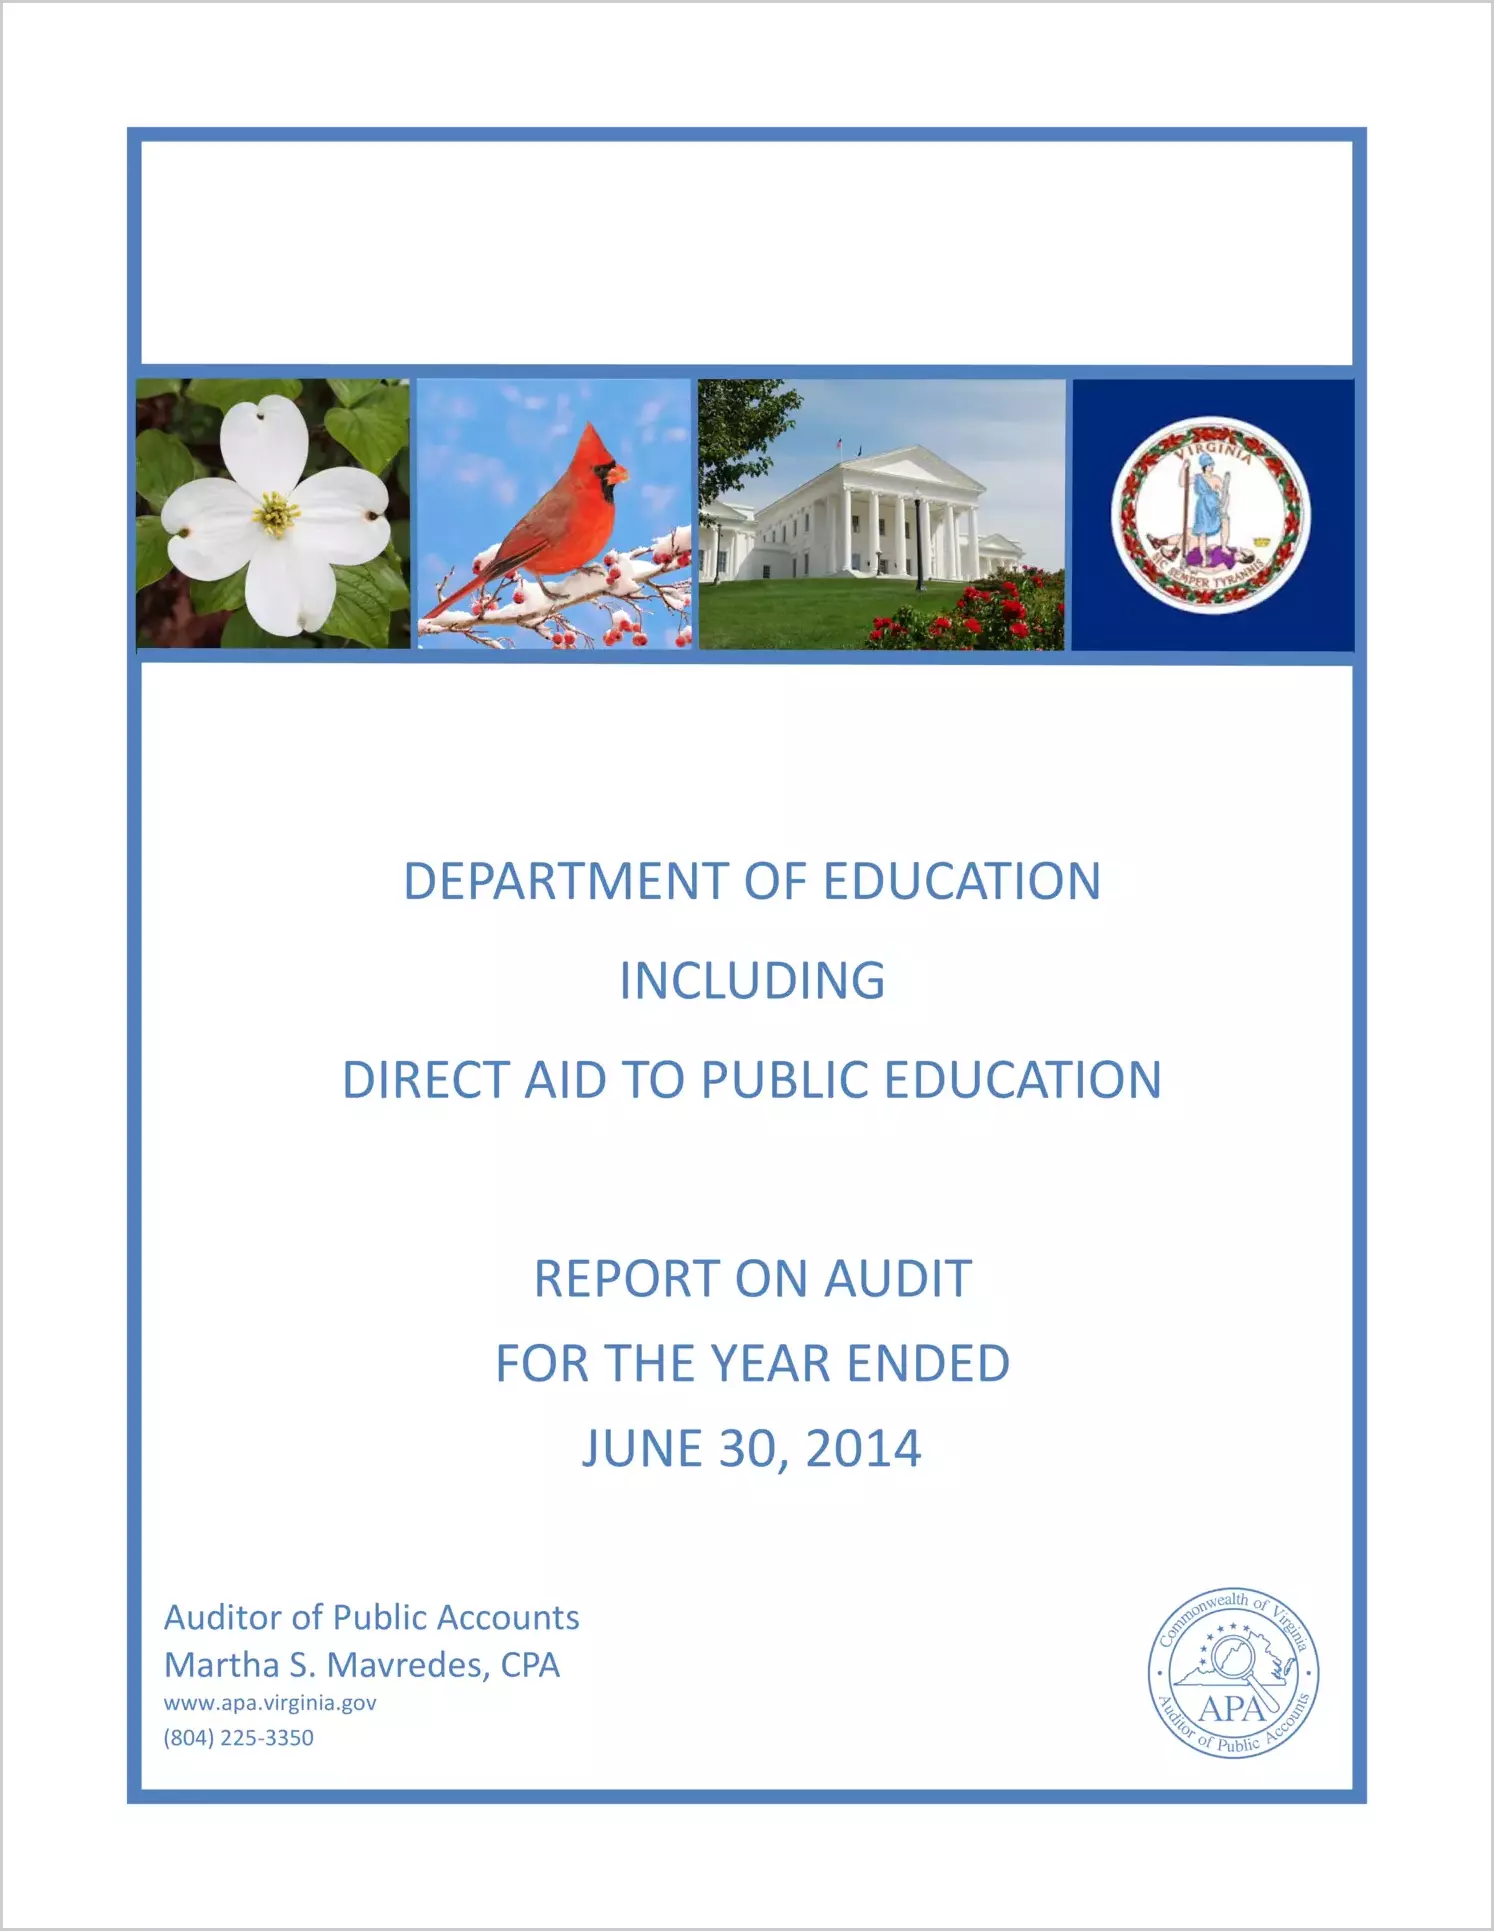 Department of Education Including Direct Aid to Public Education for the year ended June 30, 2014